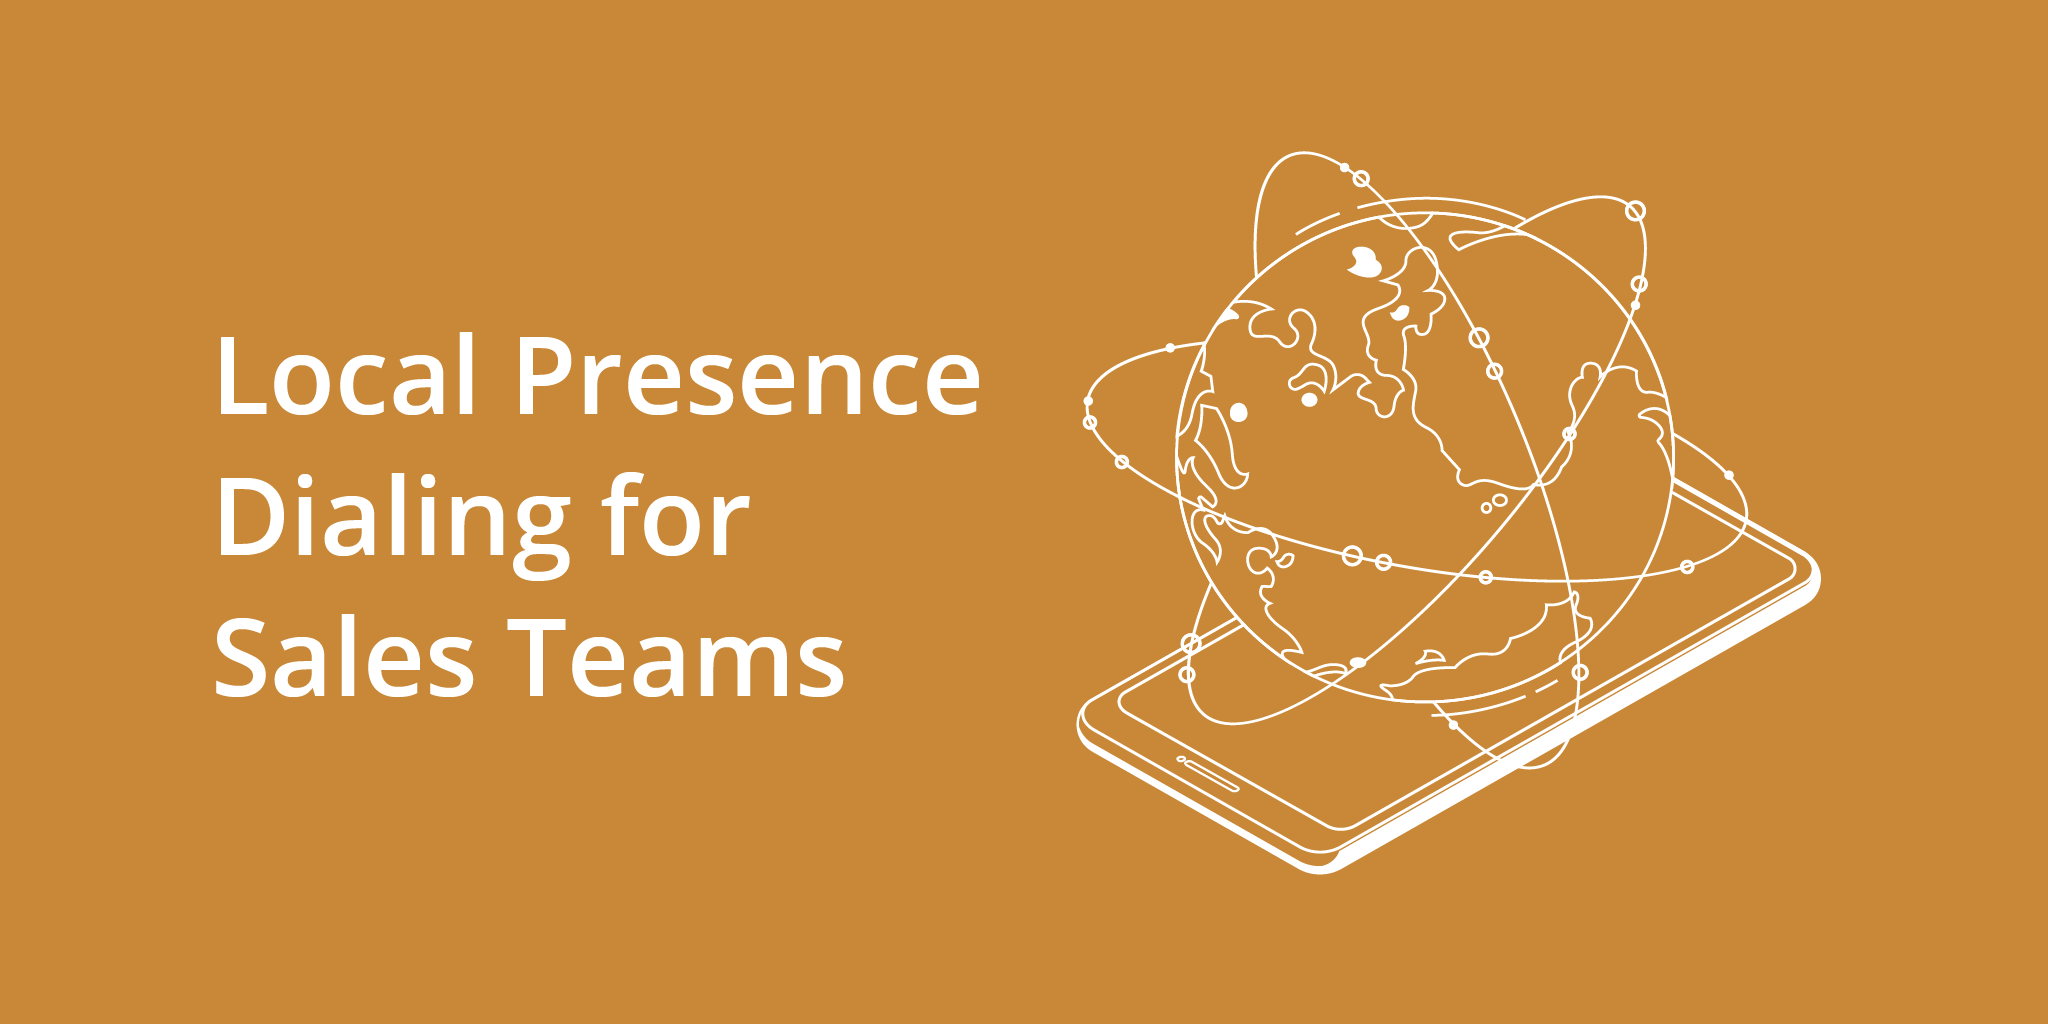 Local Presence Dialing for Sales Teams | Telephones for business